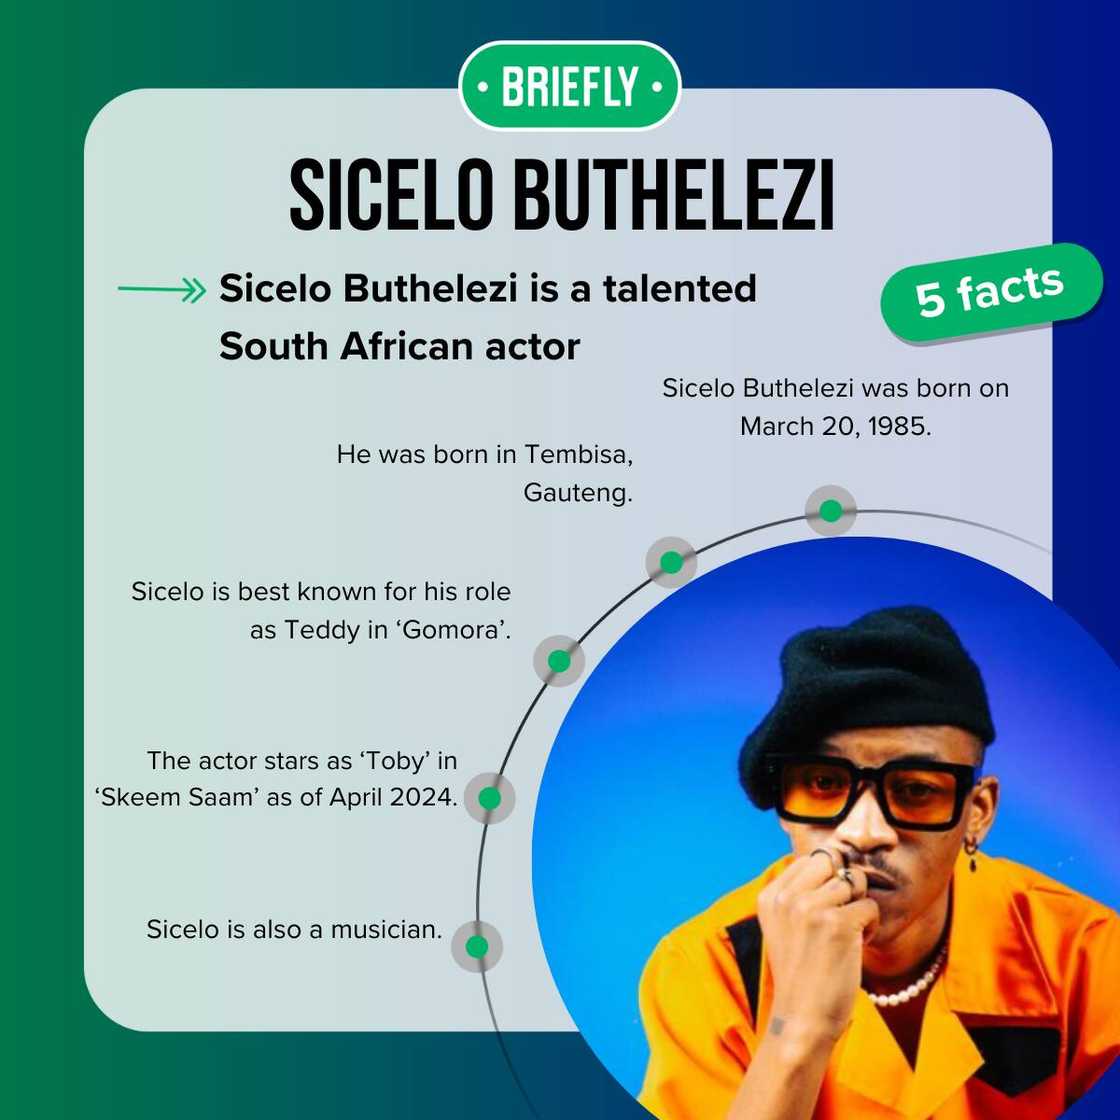 What happened to Sicelo Buthelezi?